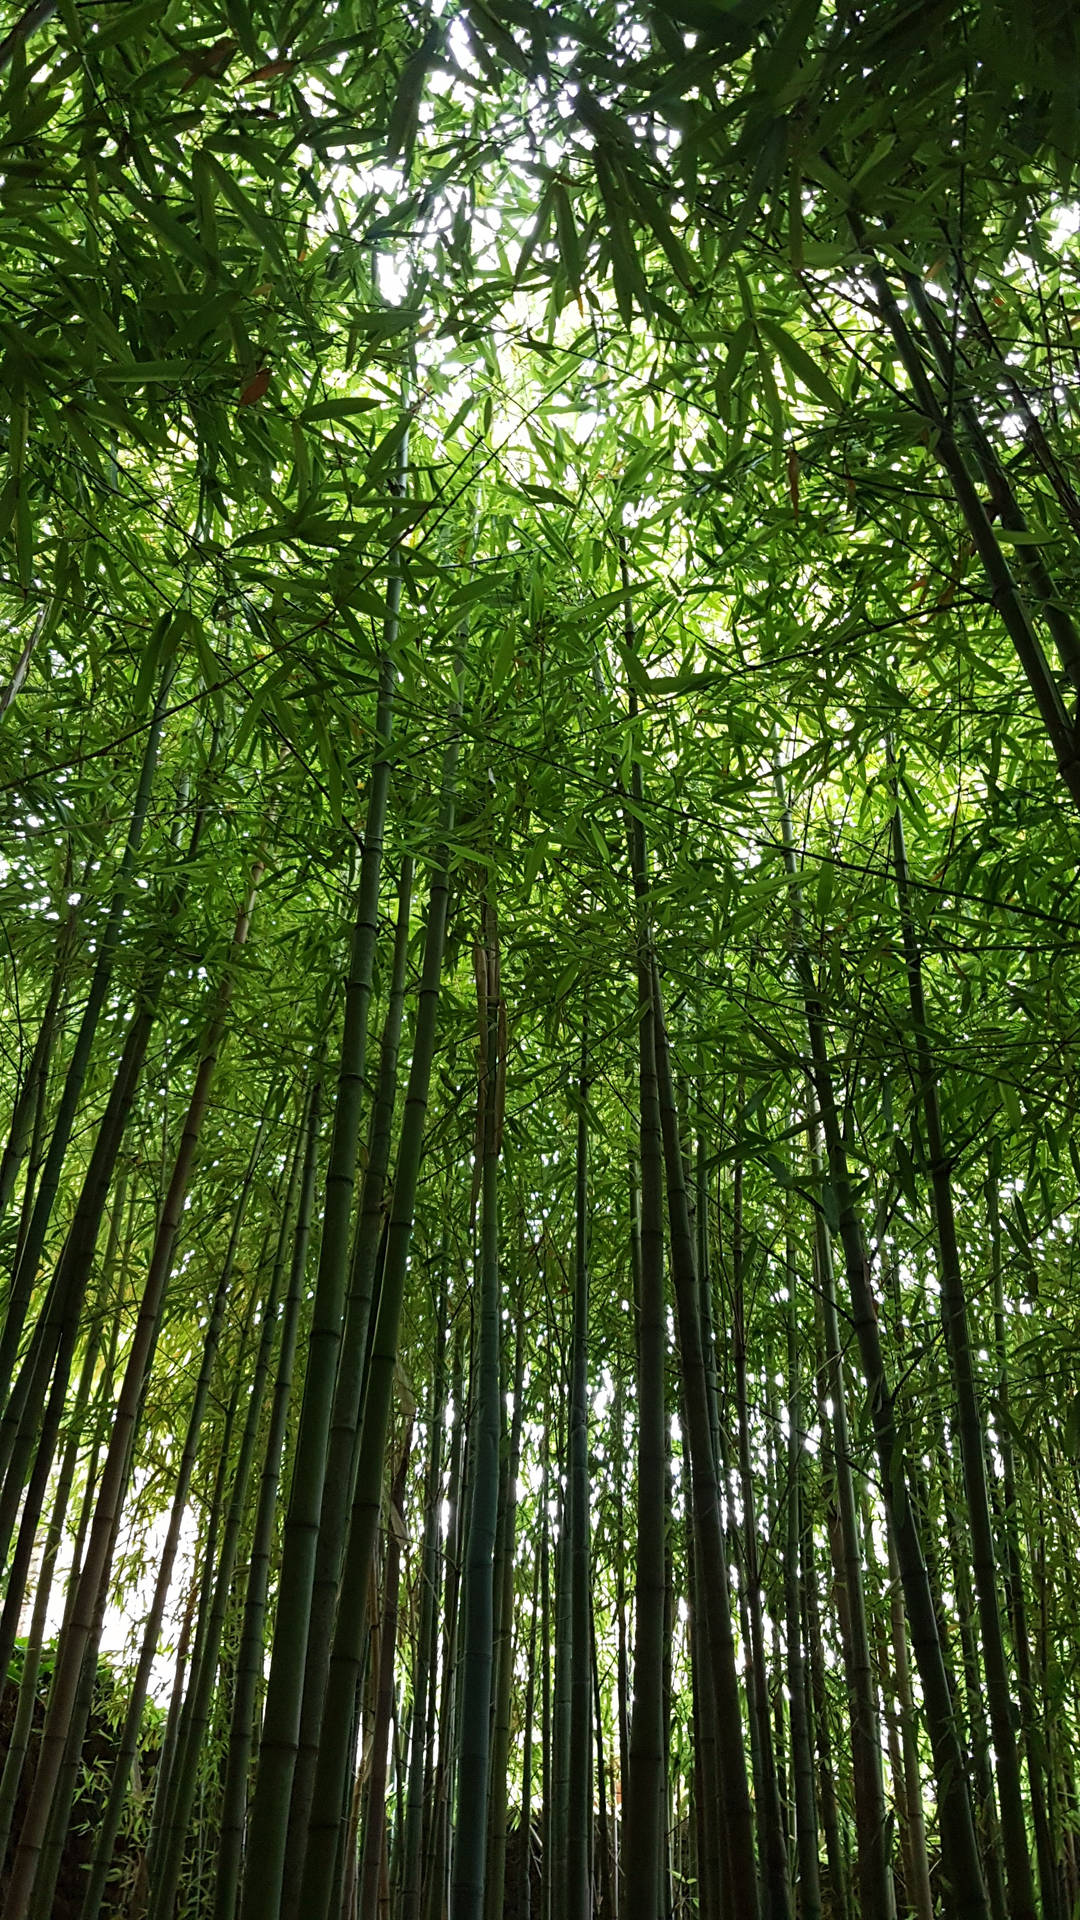 Serene Bamboo Forest Scenery for iPhone Wallpaper